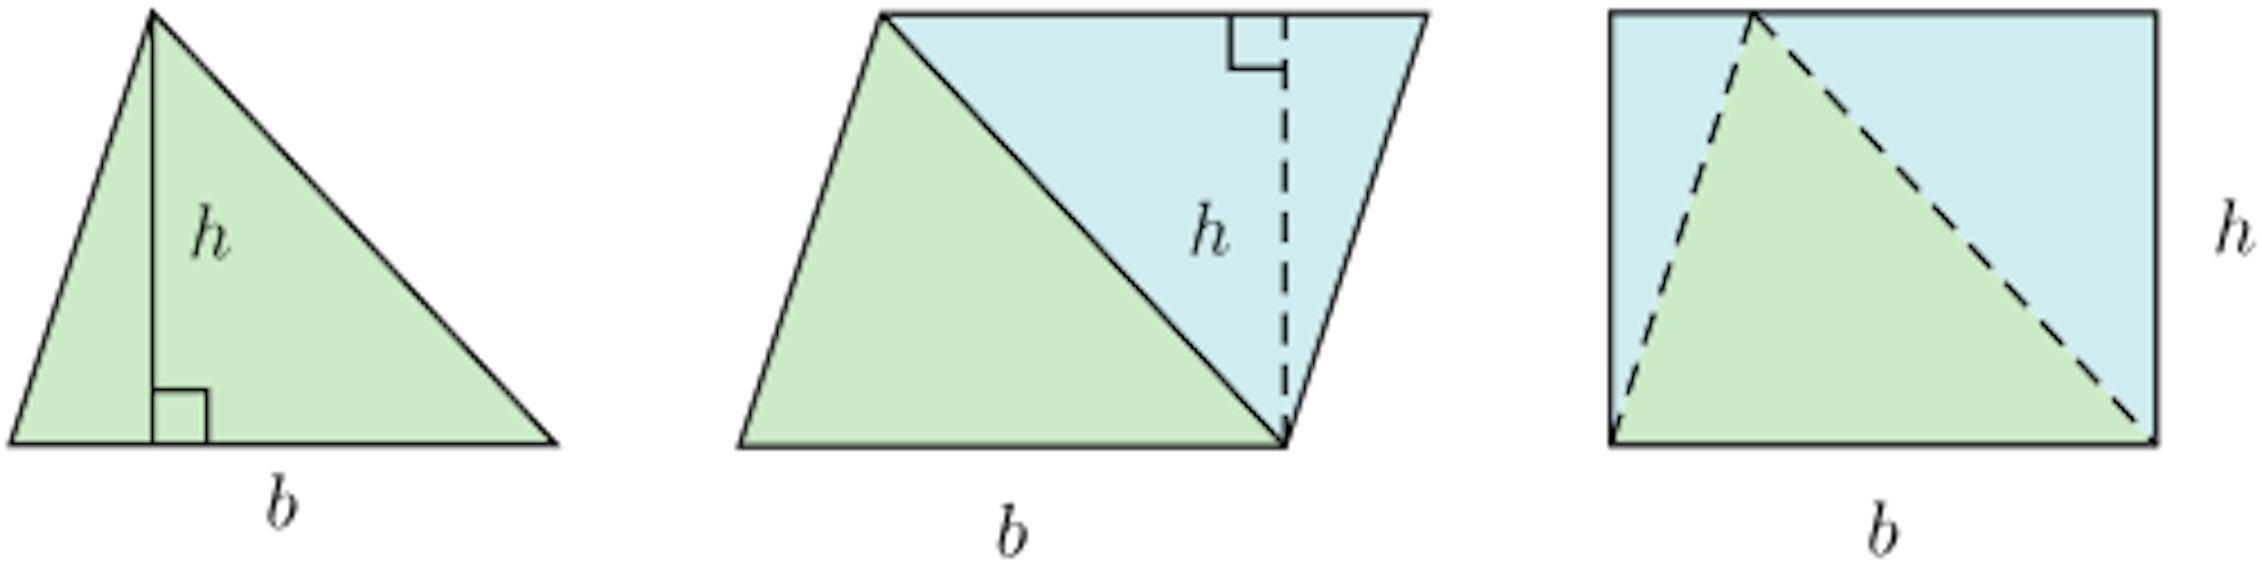 Triangles marked up with algebraic terms.